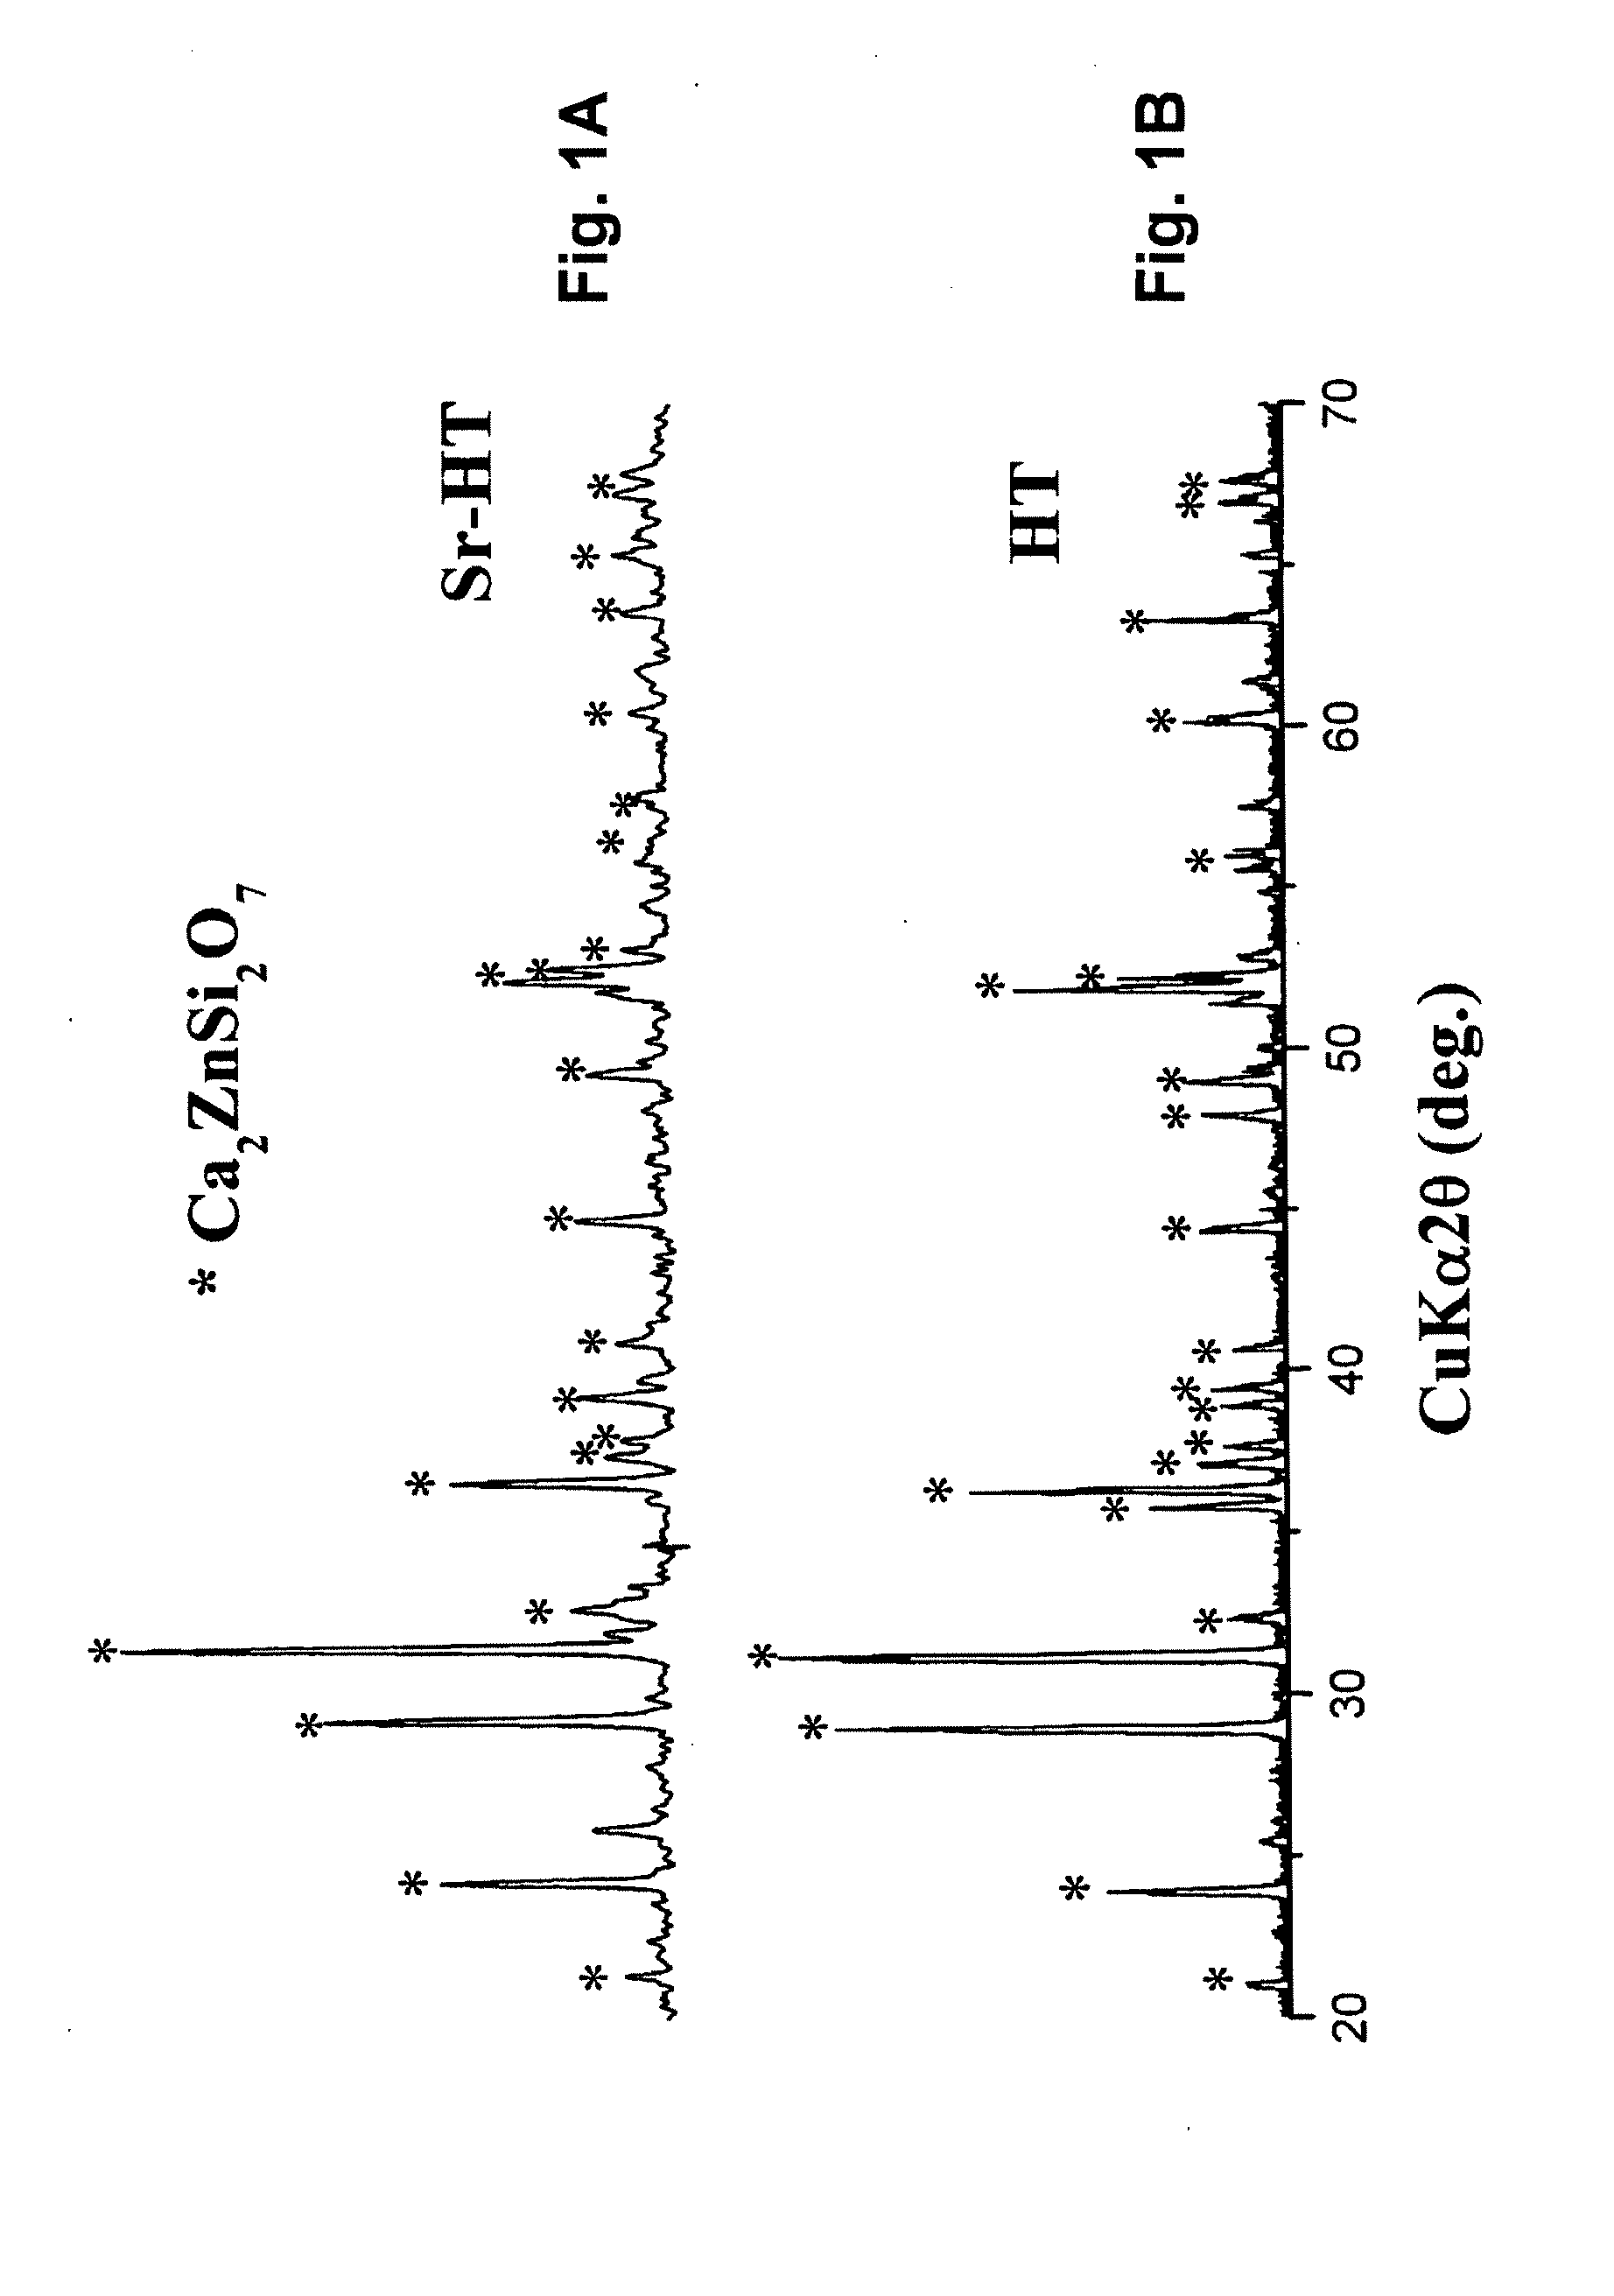 Biocompatible material and uses thereof